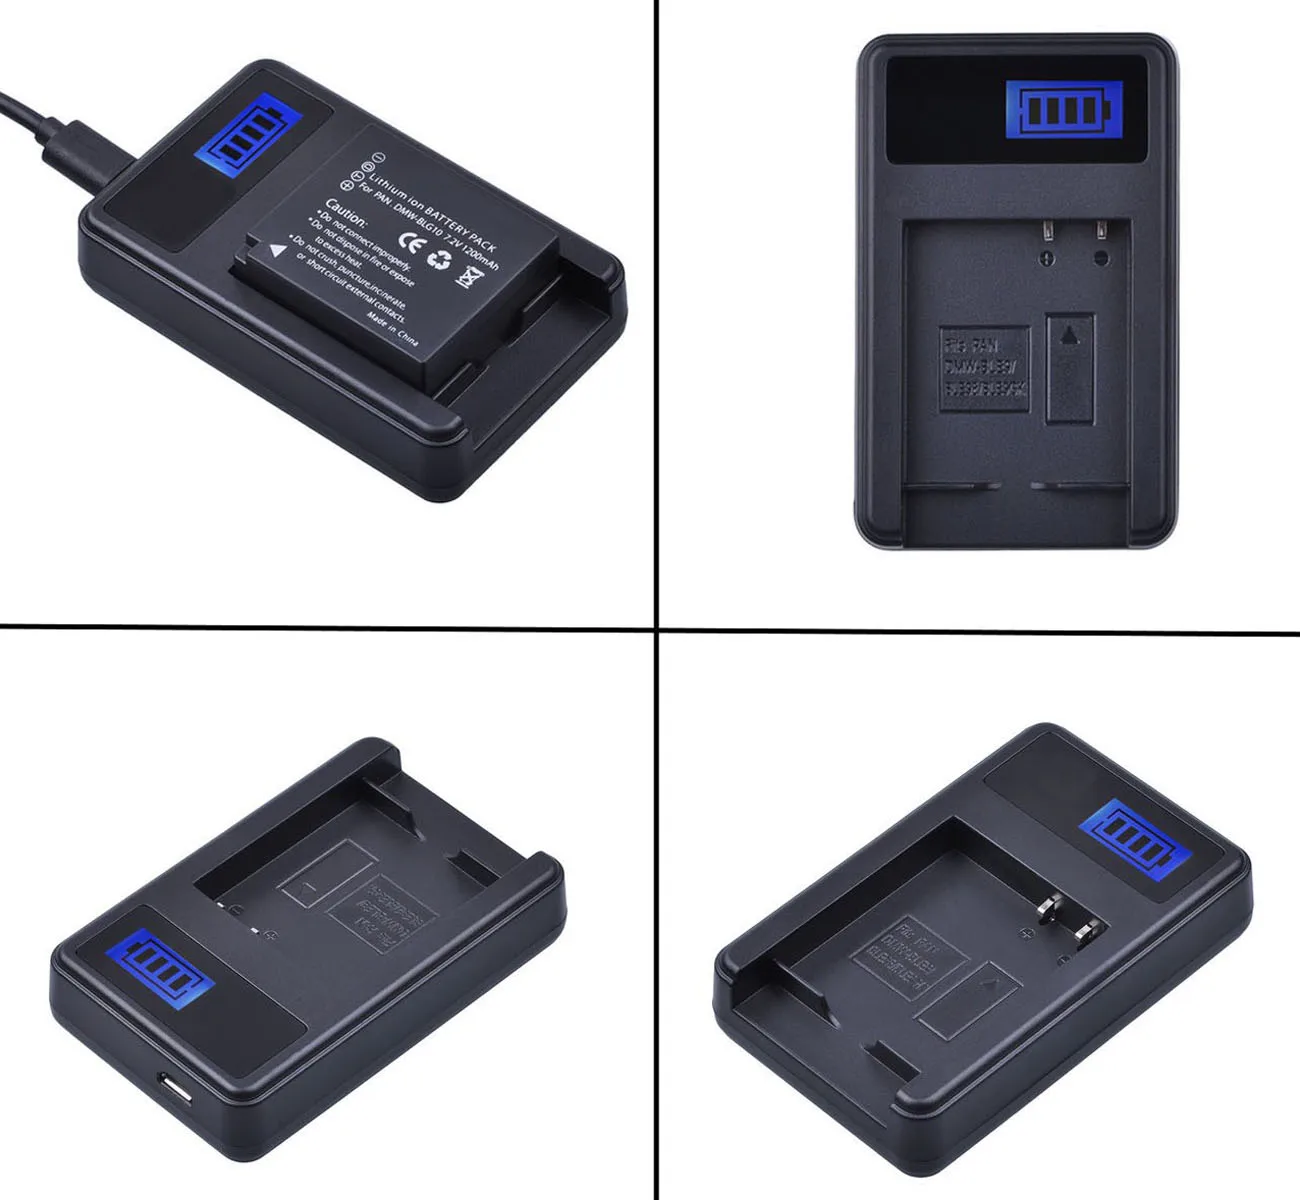 GZ-MG575 Camcorder GZ-MG555 GZ-MG465 Battery Charger for JVC Everio GZ-MG435